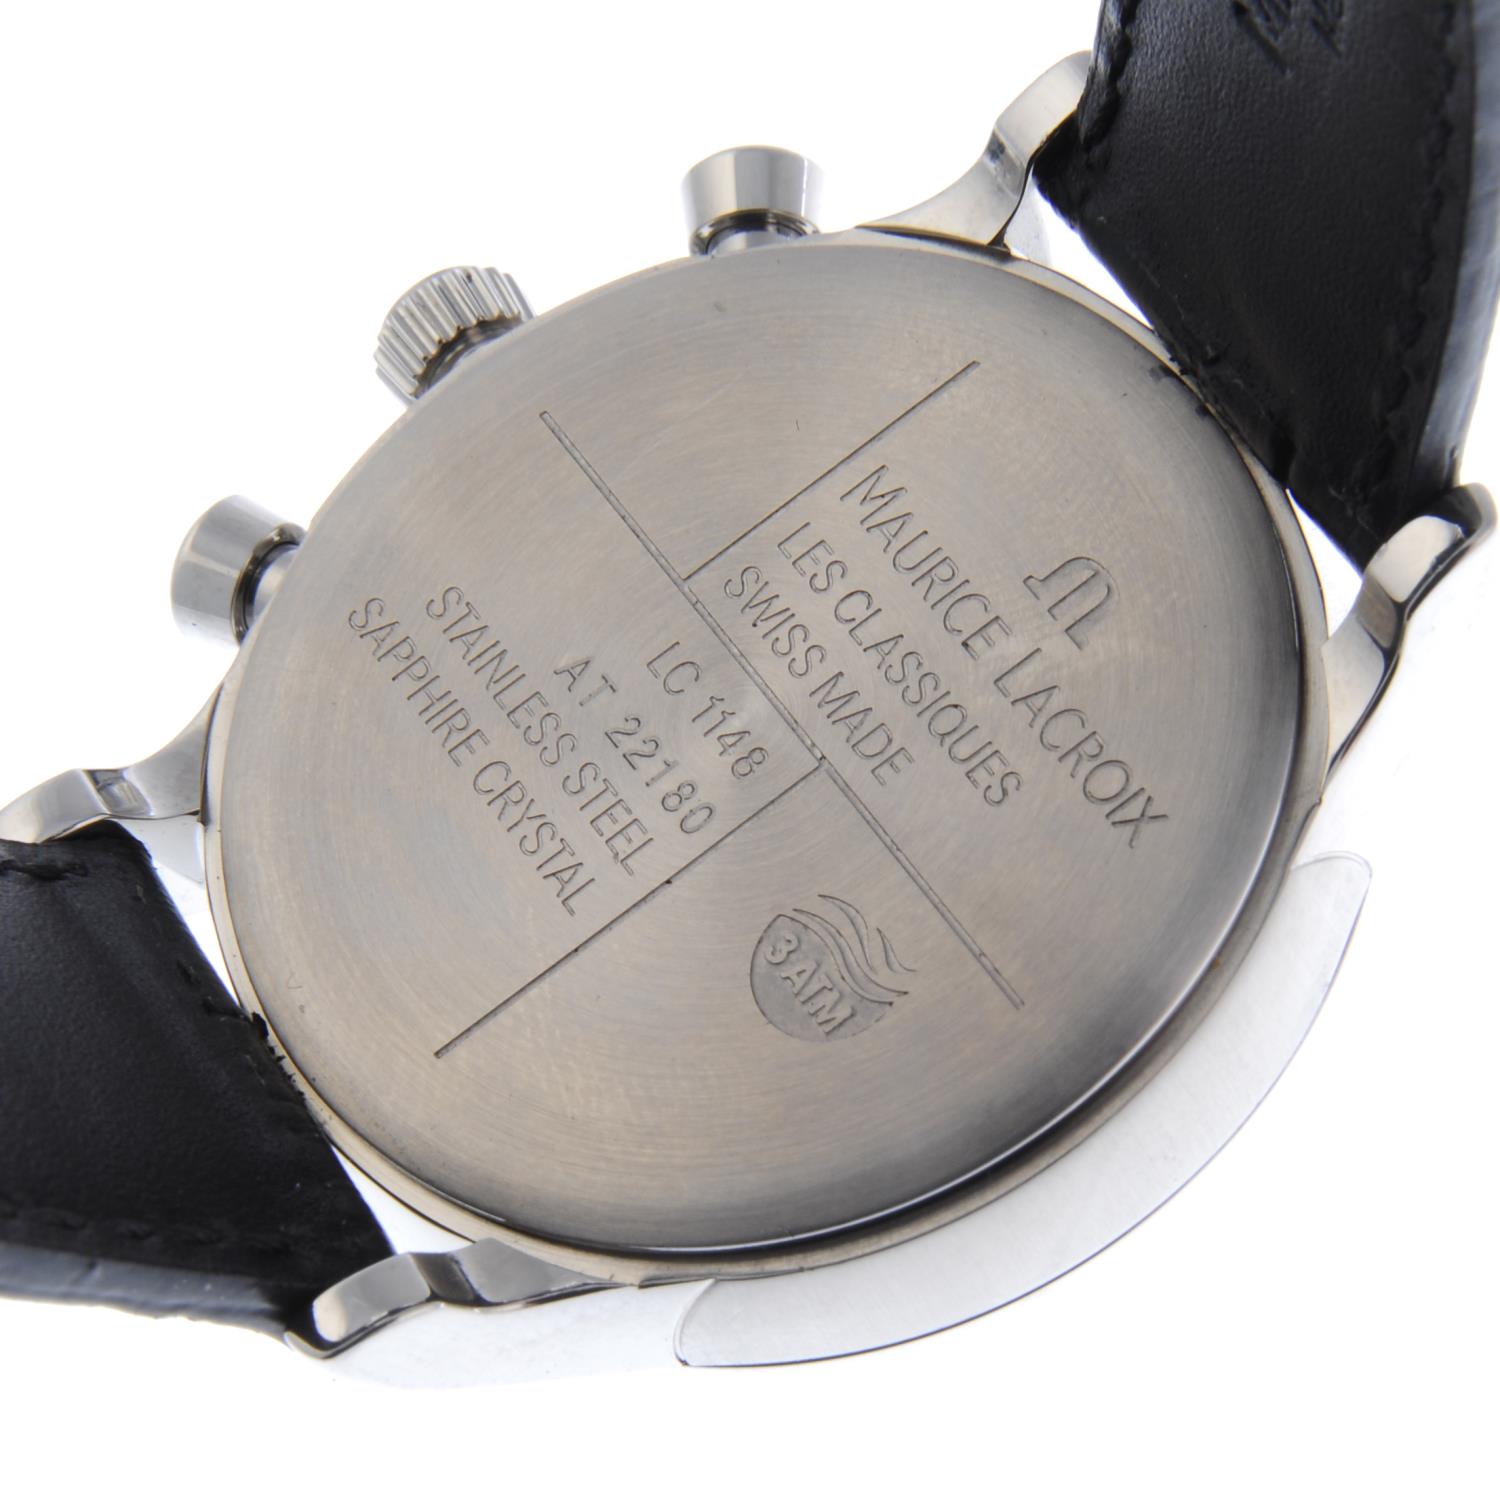 MAURICE LACROIX - a gentleman's Miros chronograph bracelet watch. - Image 6 of 6